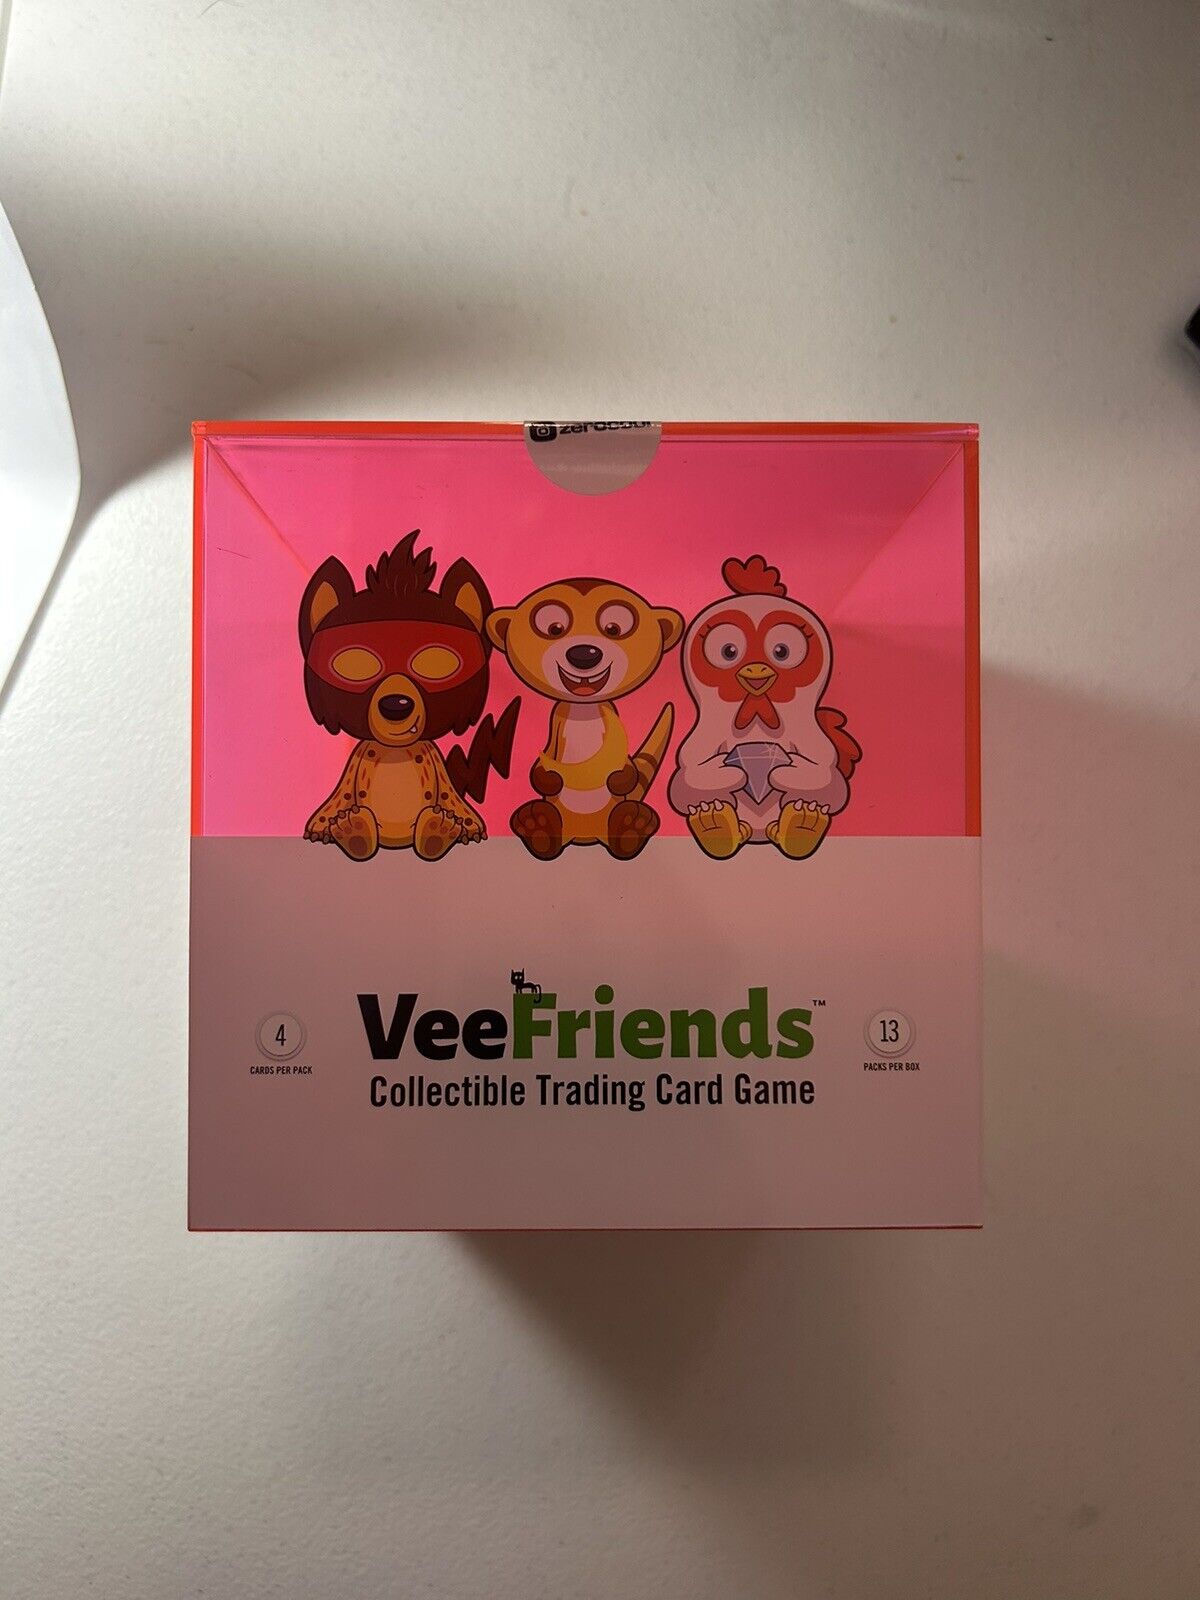 Veefriends Vee Complete Rare Pink Signature Debut Edition Sealed Box Gary